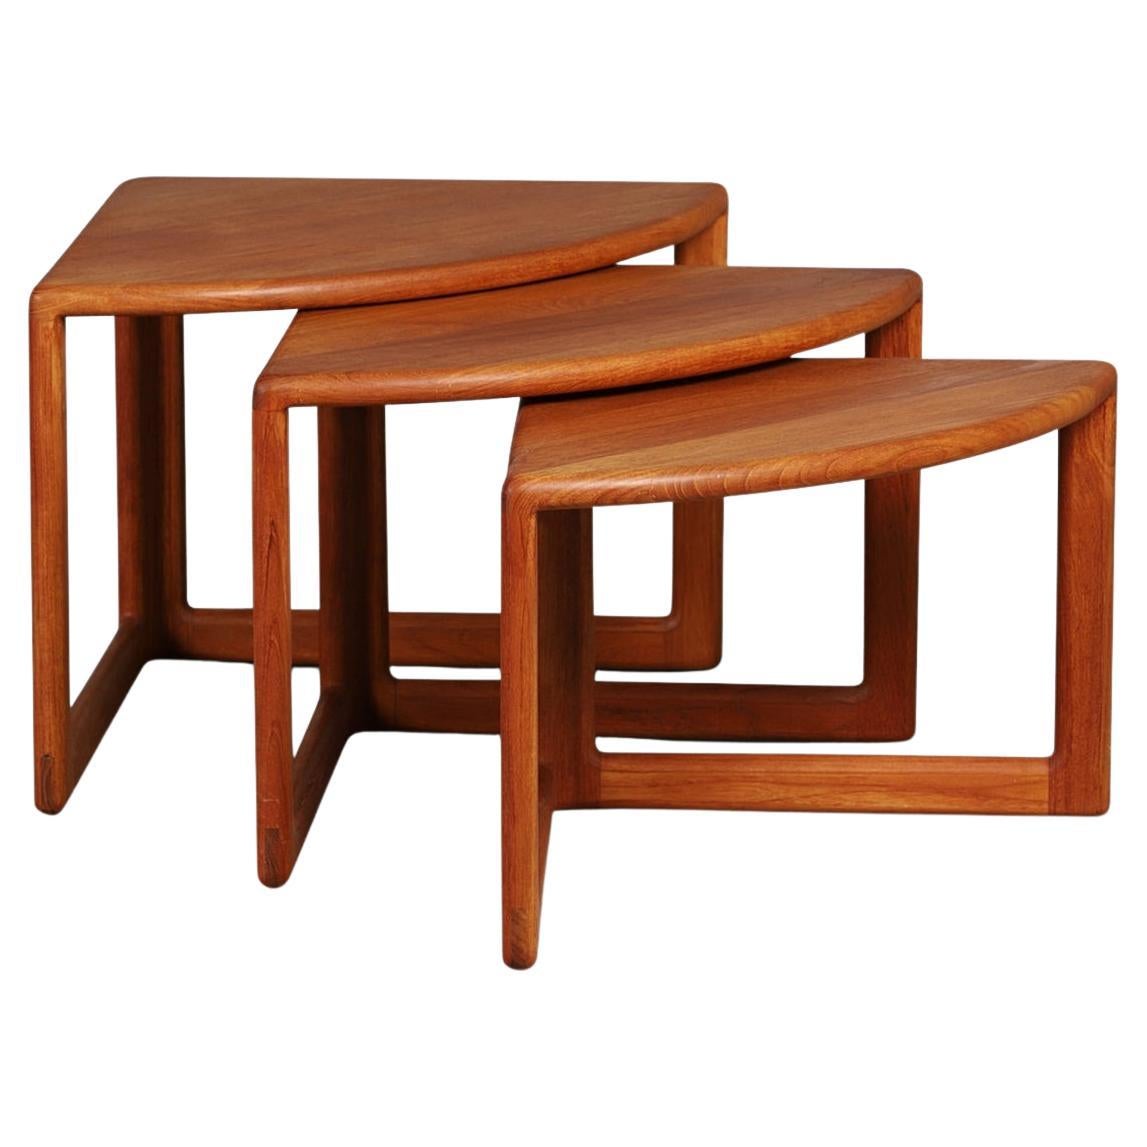 Niels Bach Nesting Tables and Stacking Tables